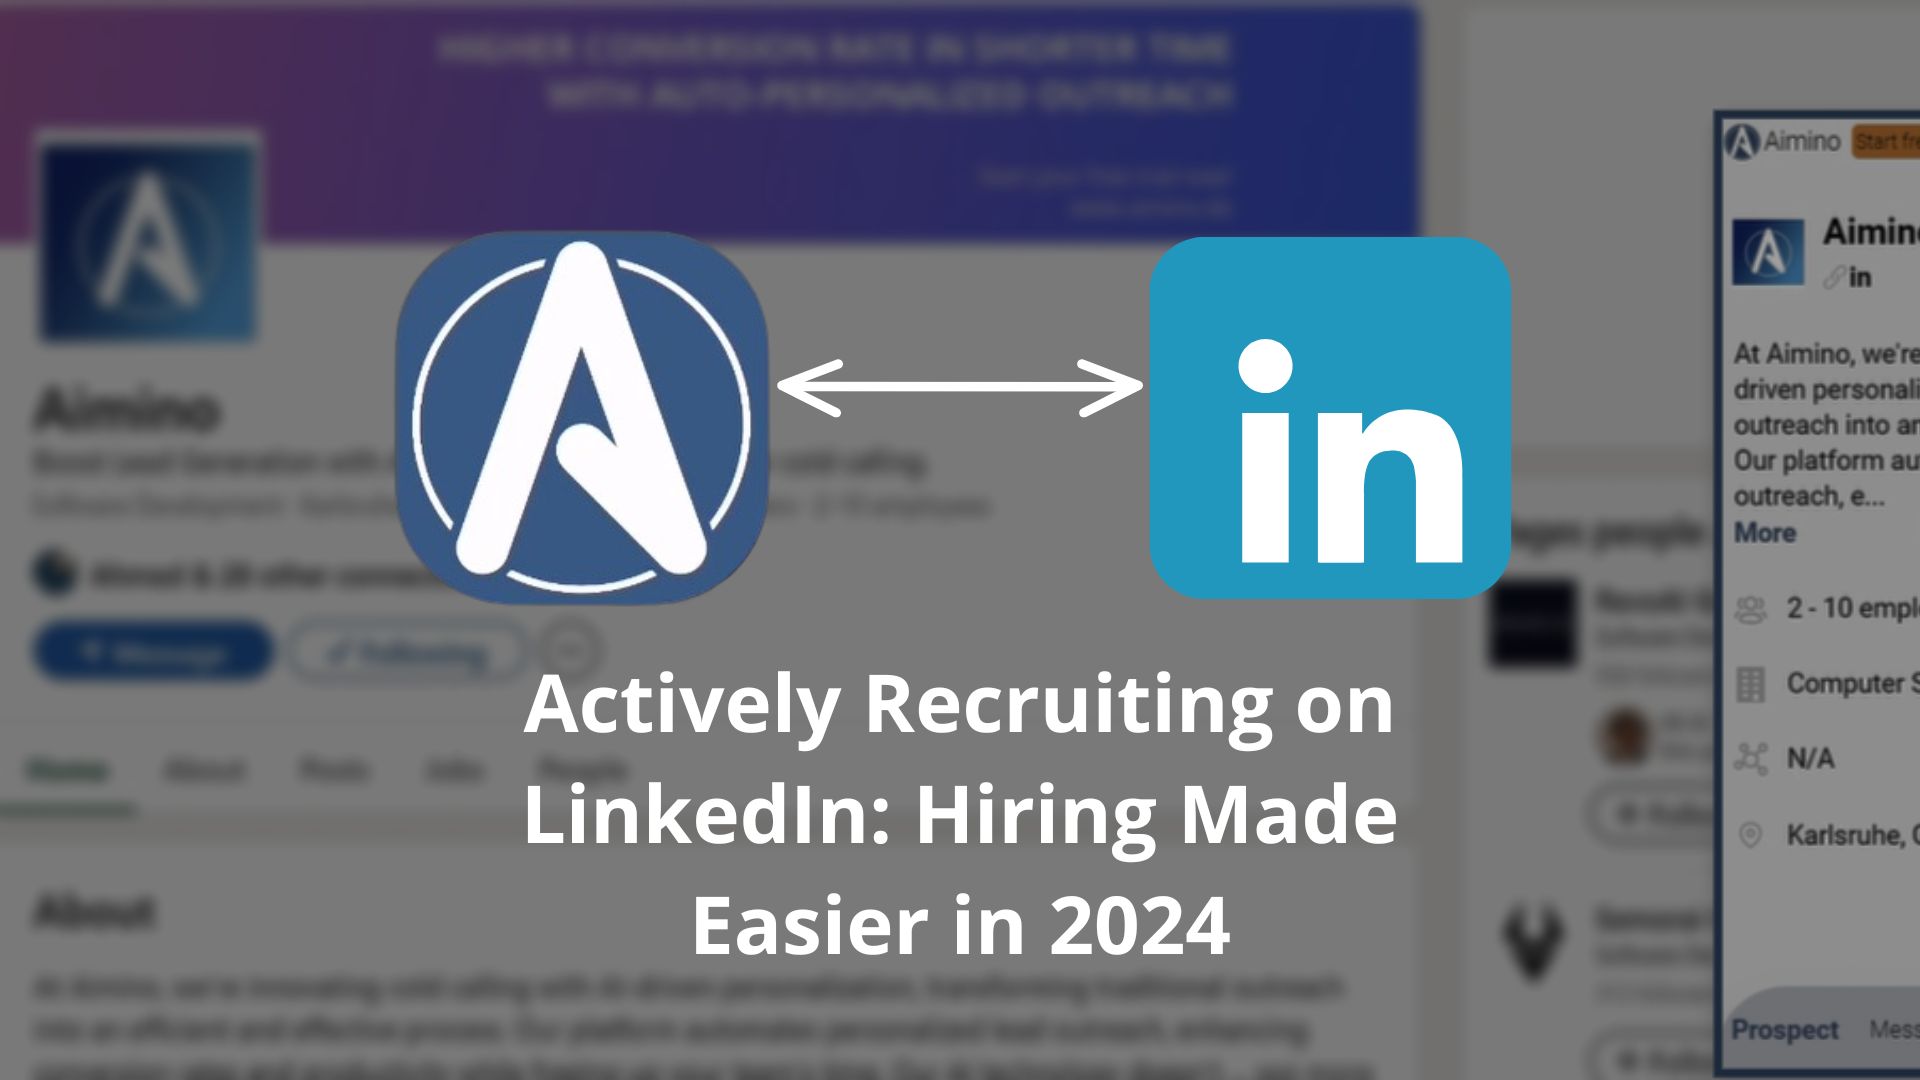 Actively Recruiting on LinkedIn: Hiring Made Easier in 2024